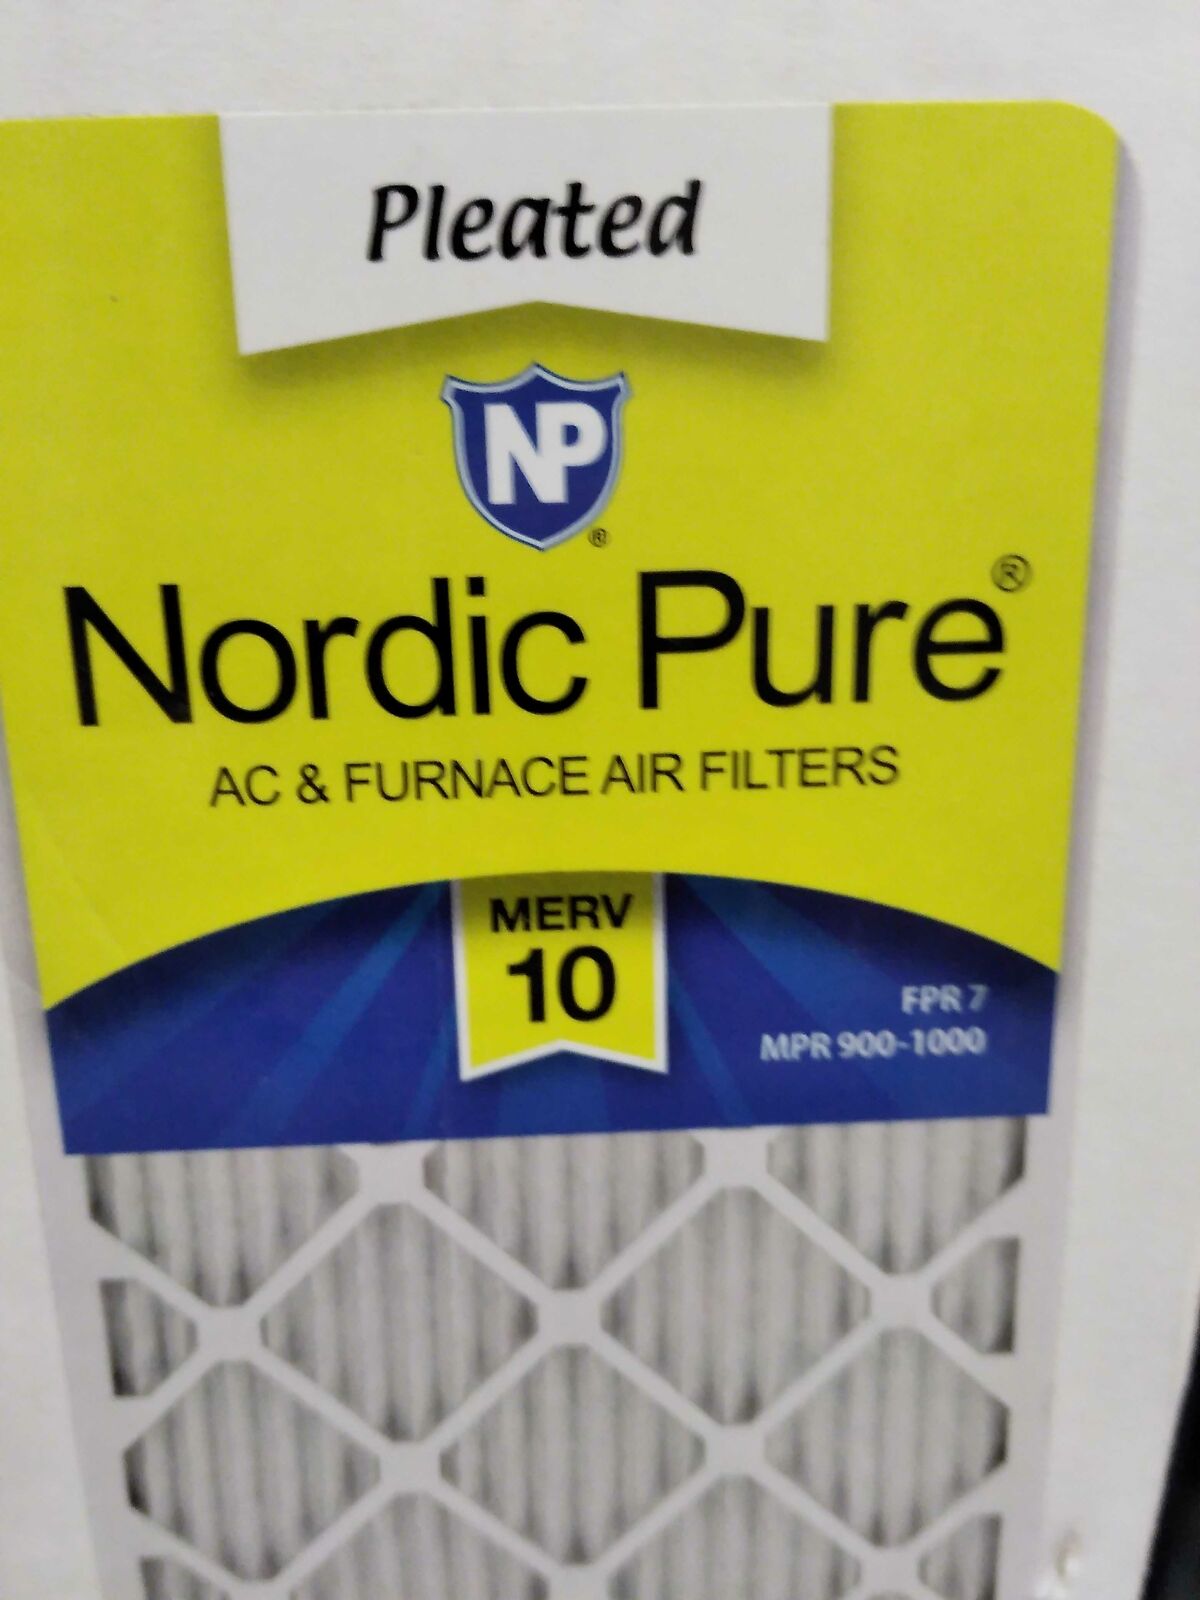 20 x 20 x 1 Pleated MERV 10 - FPR 7 Air Filter (3-Pack) by Nordic Pure